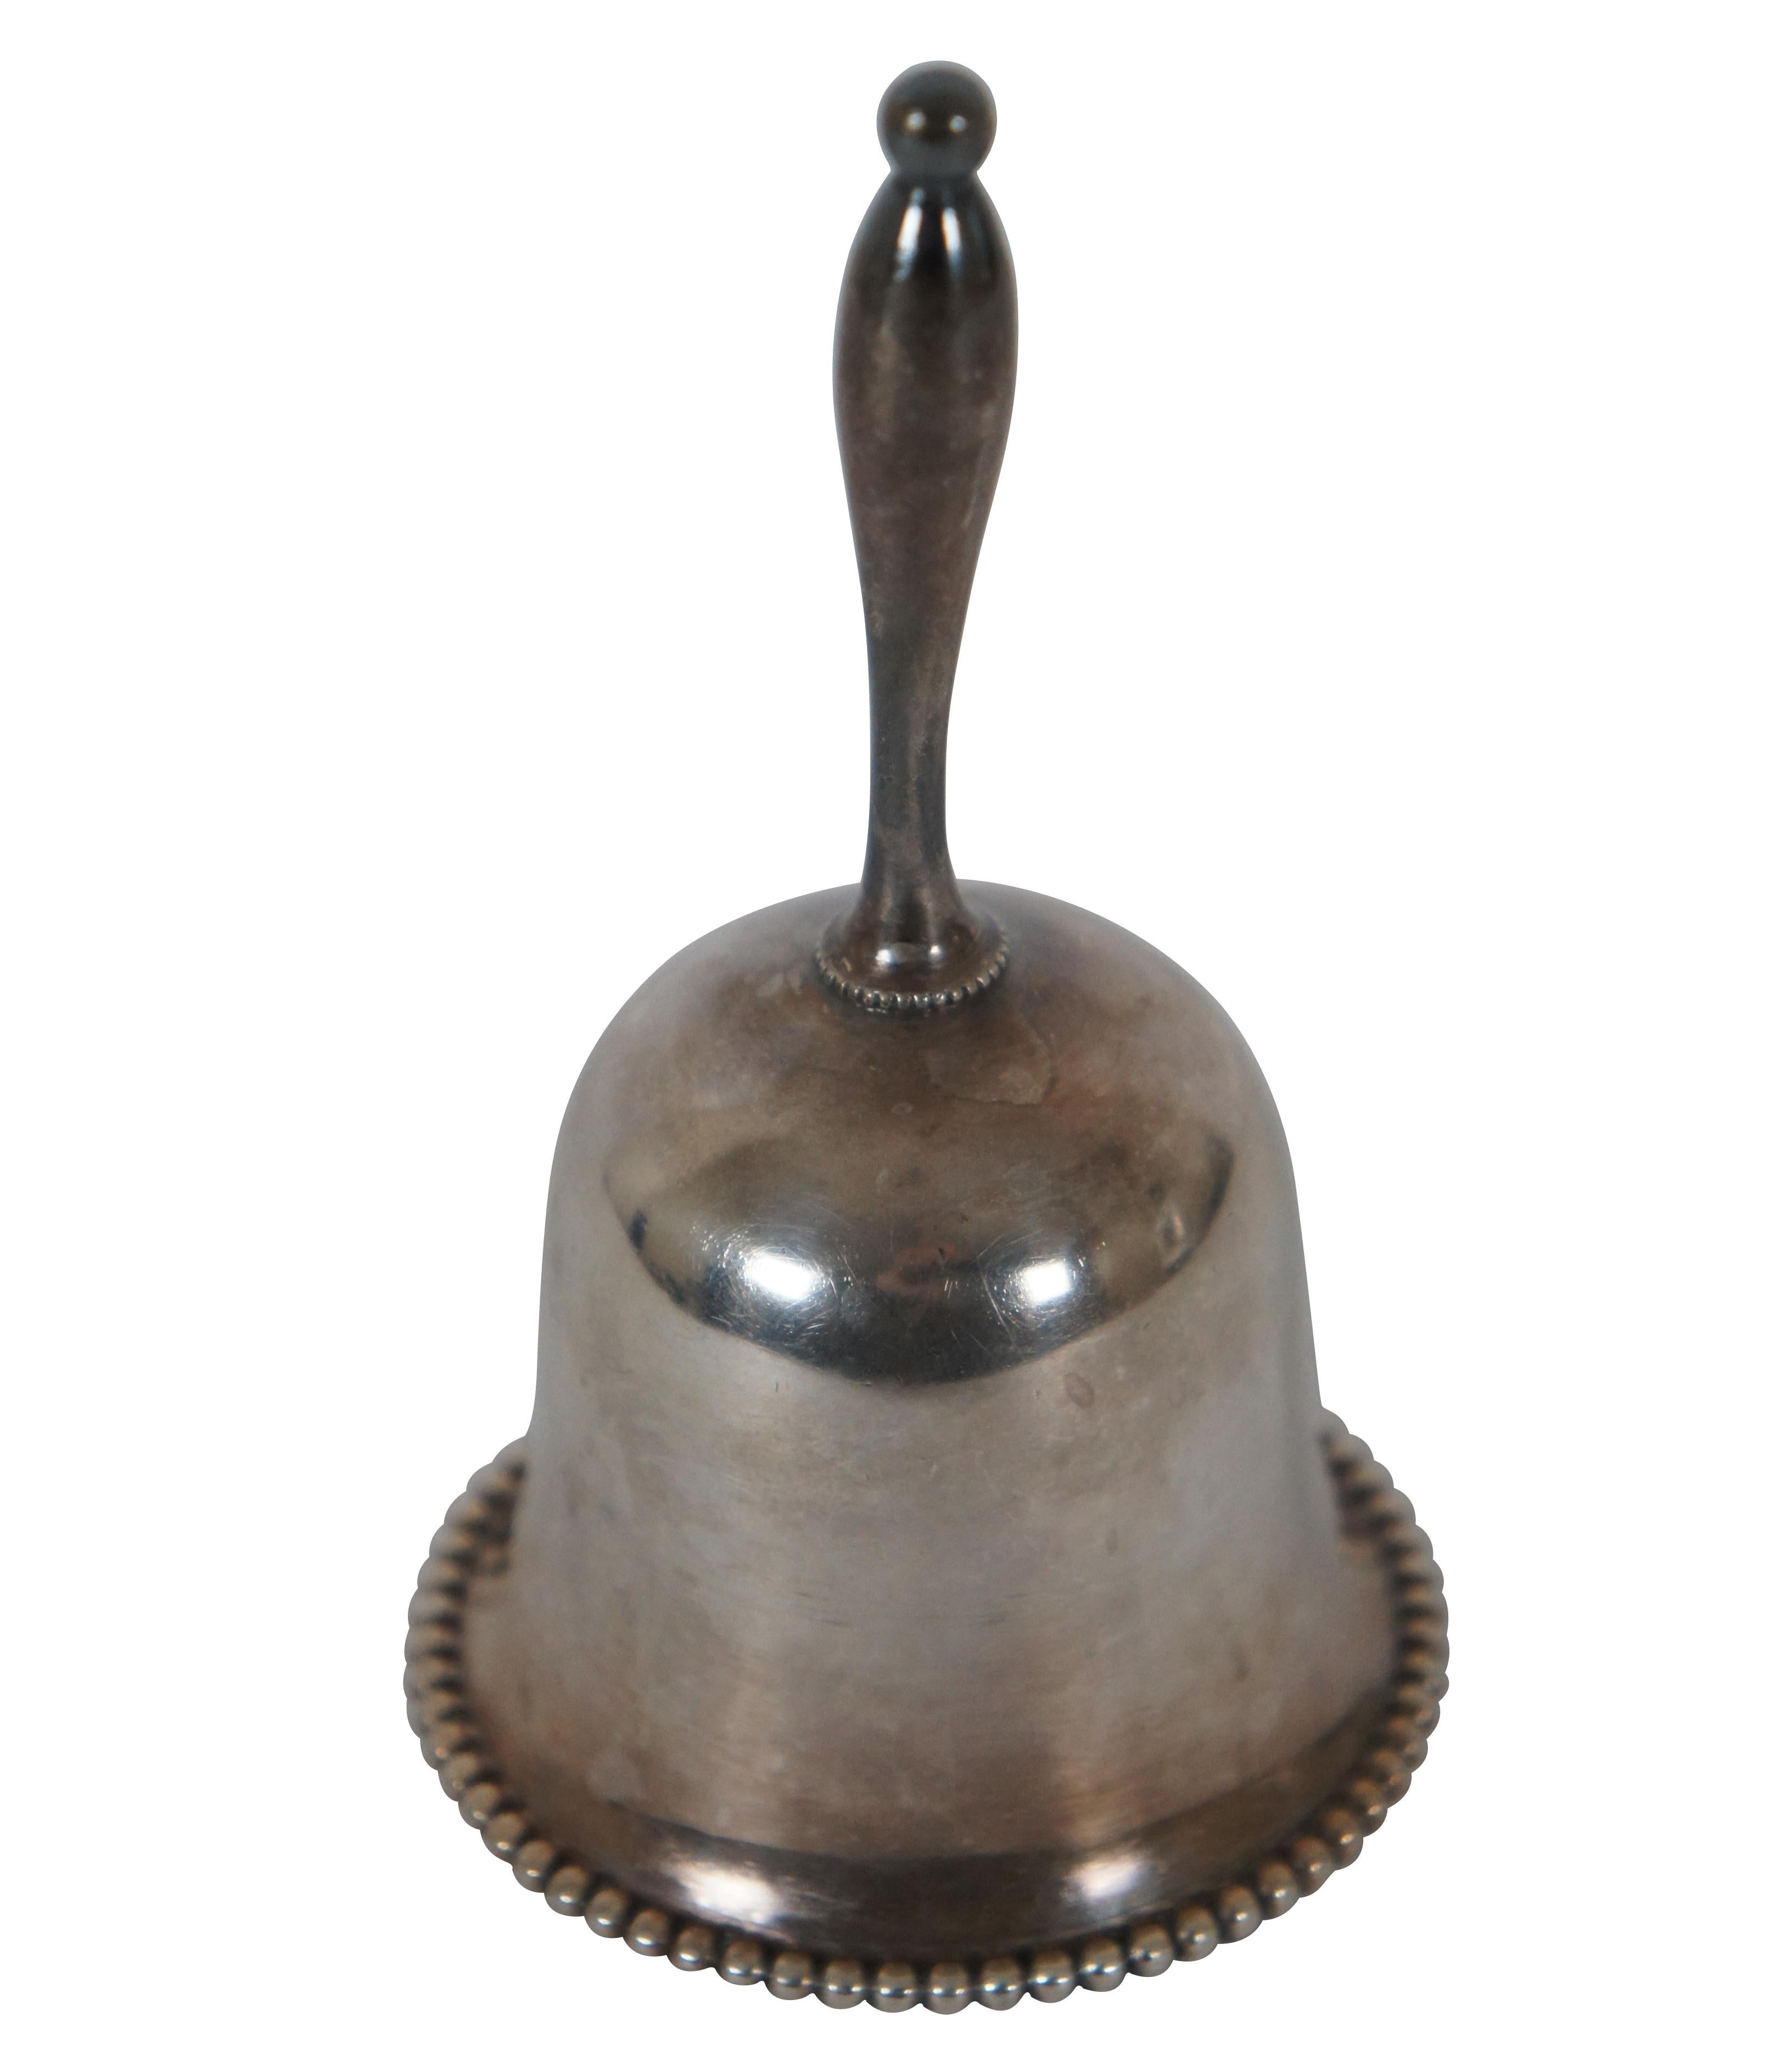 Vintage silver plate hand bell / dinner bell featuring a spindle style handle and beaded opening.